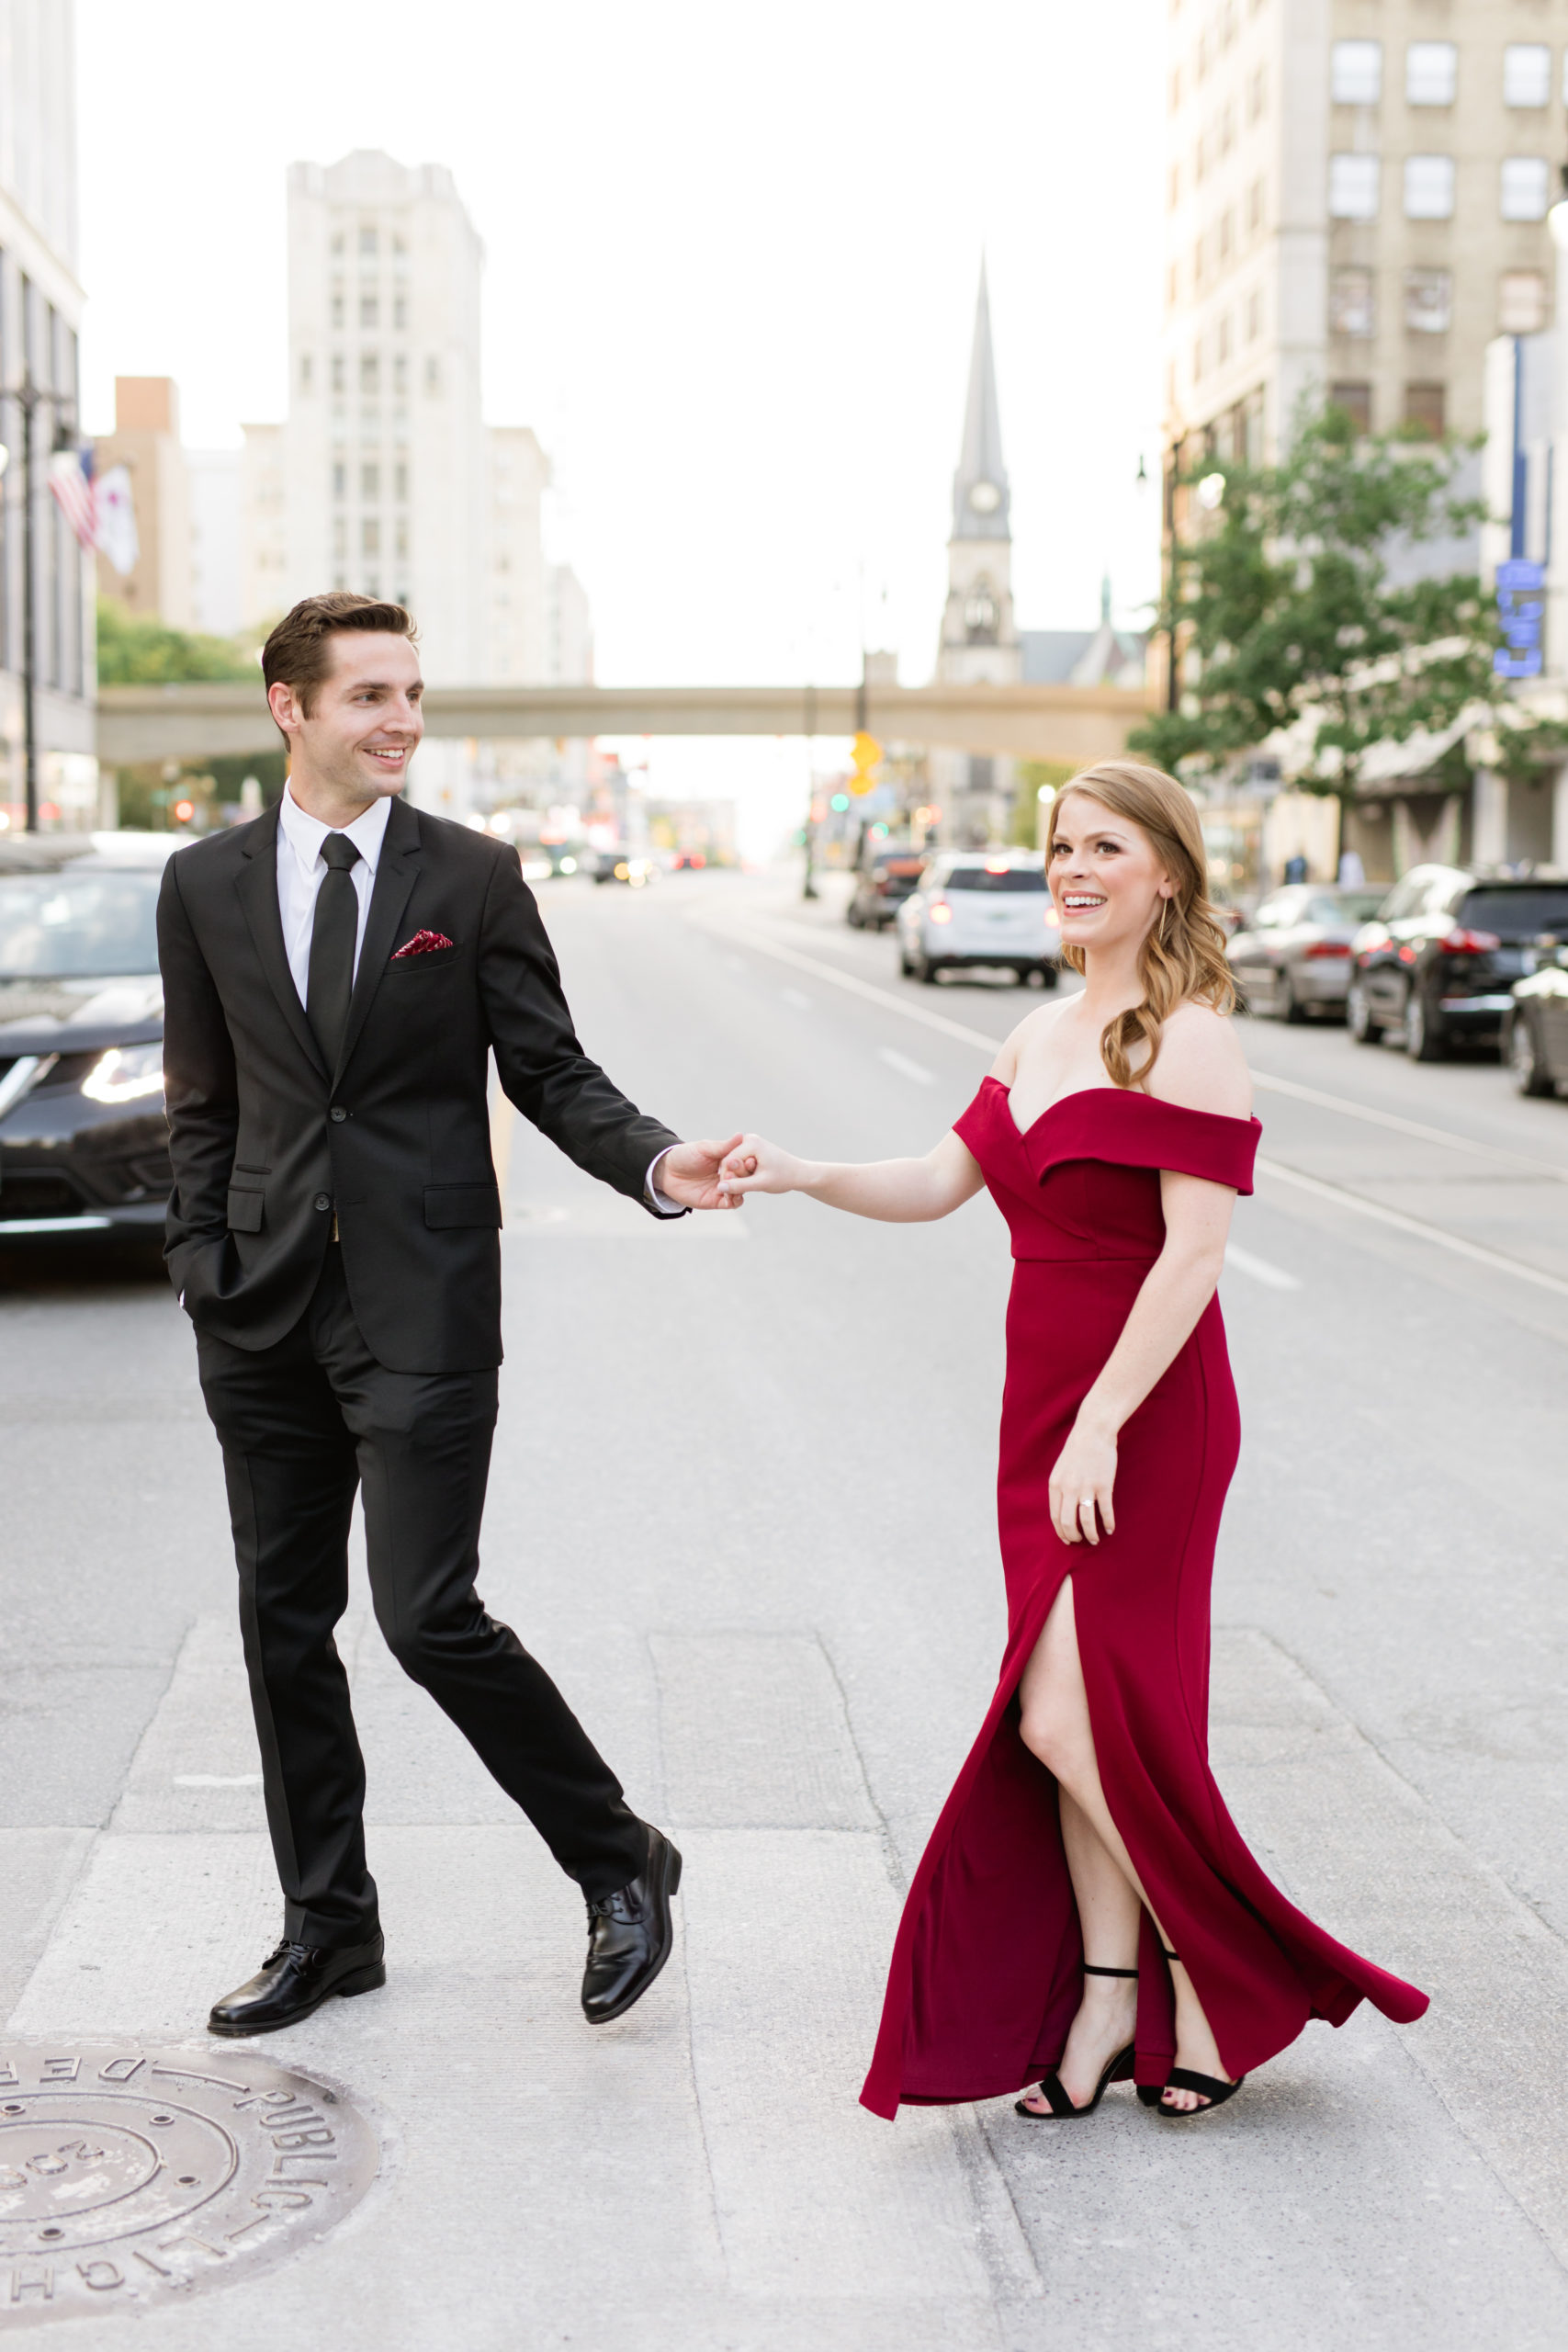 Couple walking in the street for engagement photo | Detroit | Breanne Rochelle Photography